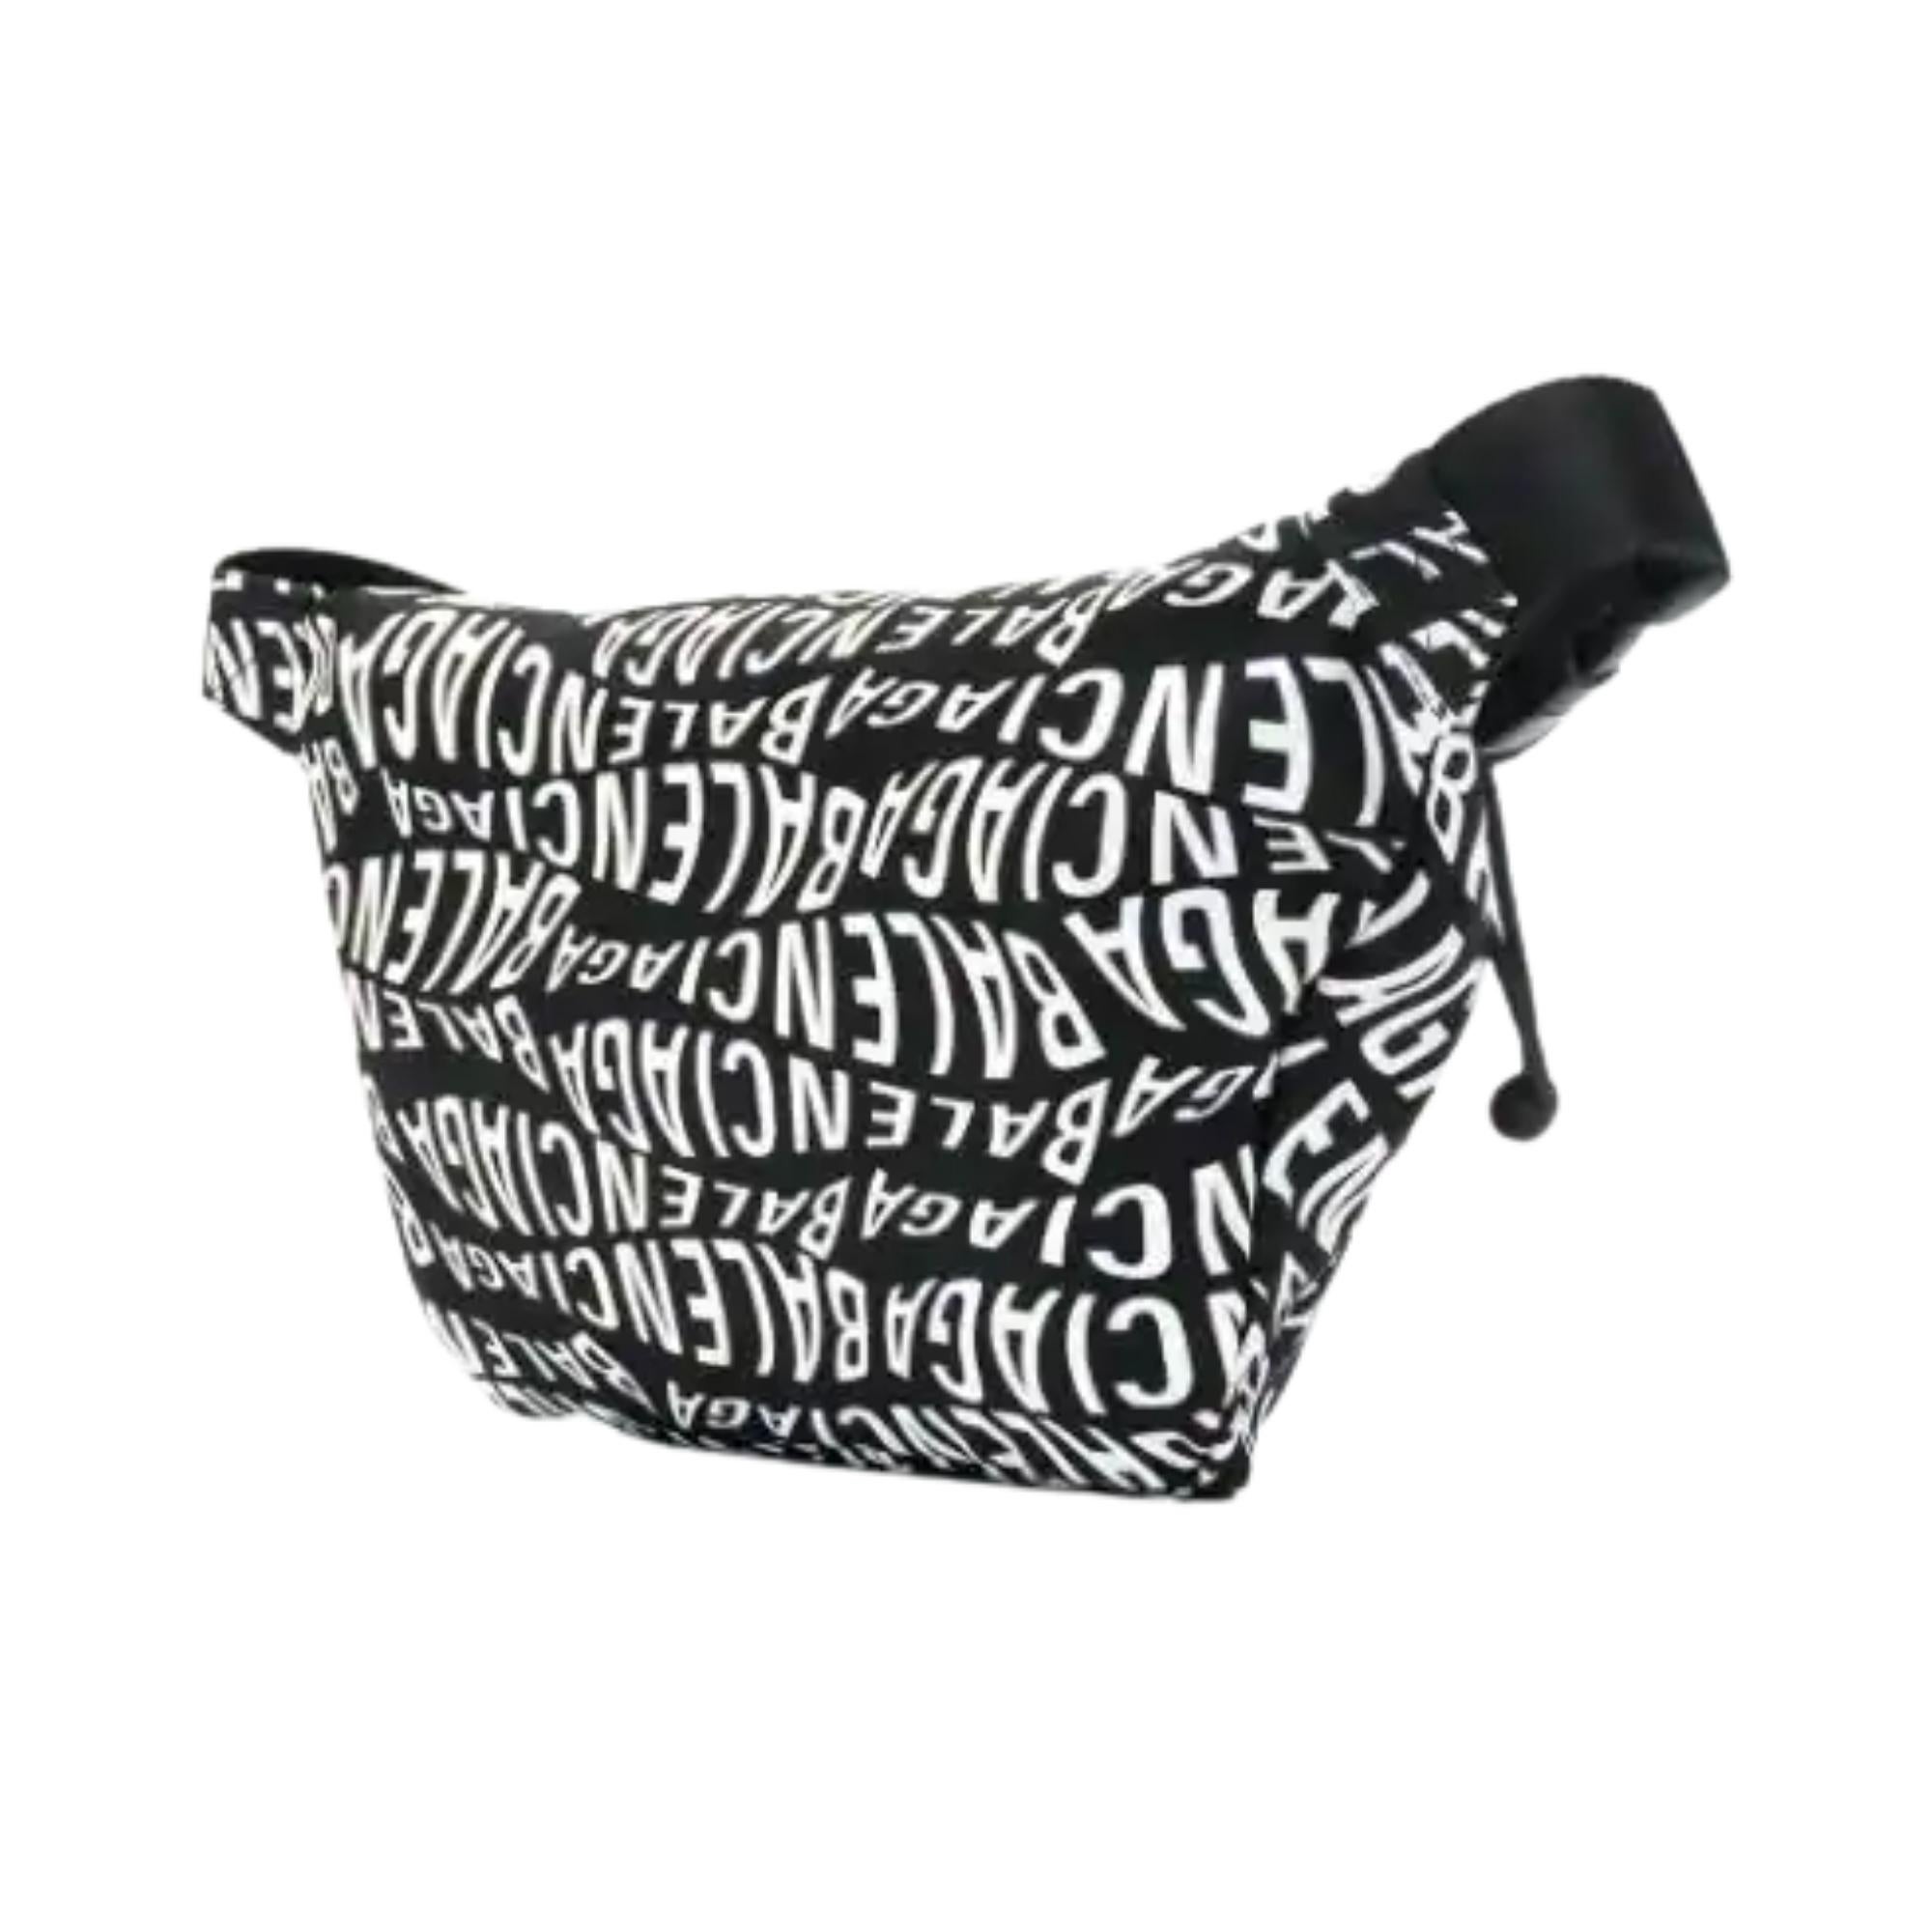 Canvas pouch in black featuring logo pattern printed in white throughout. Adjustable webbing belt-style strap with press-release fastening. Logo embroidered in white and zippered compartment at face. Zip closure at main compartment. Logo patch at